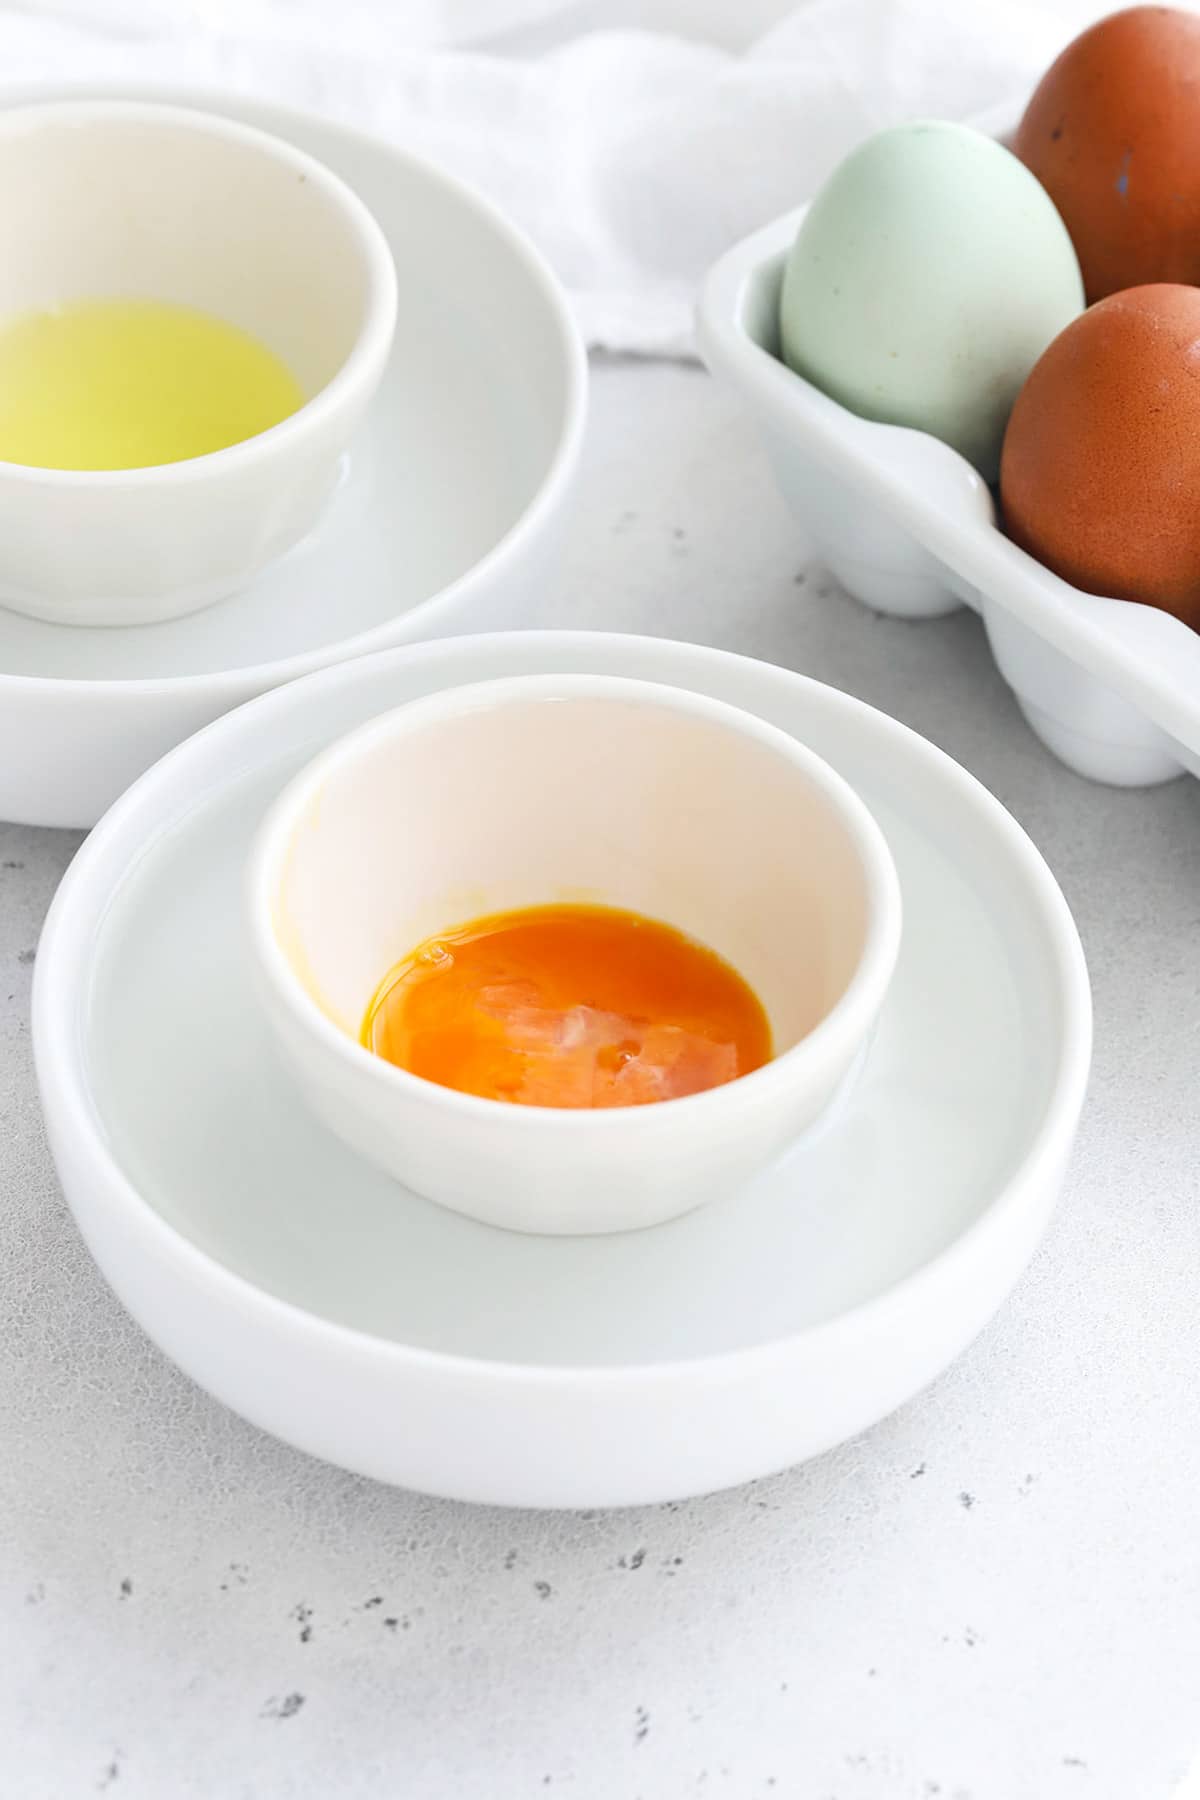 bringing separated eggs to room temperature in small bowls